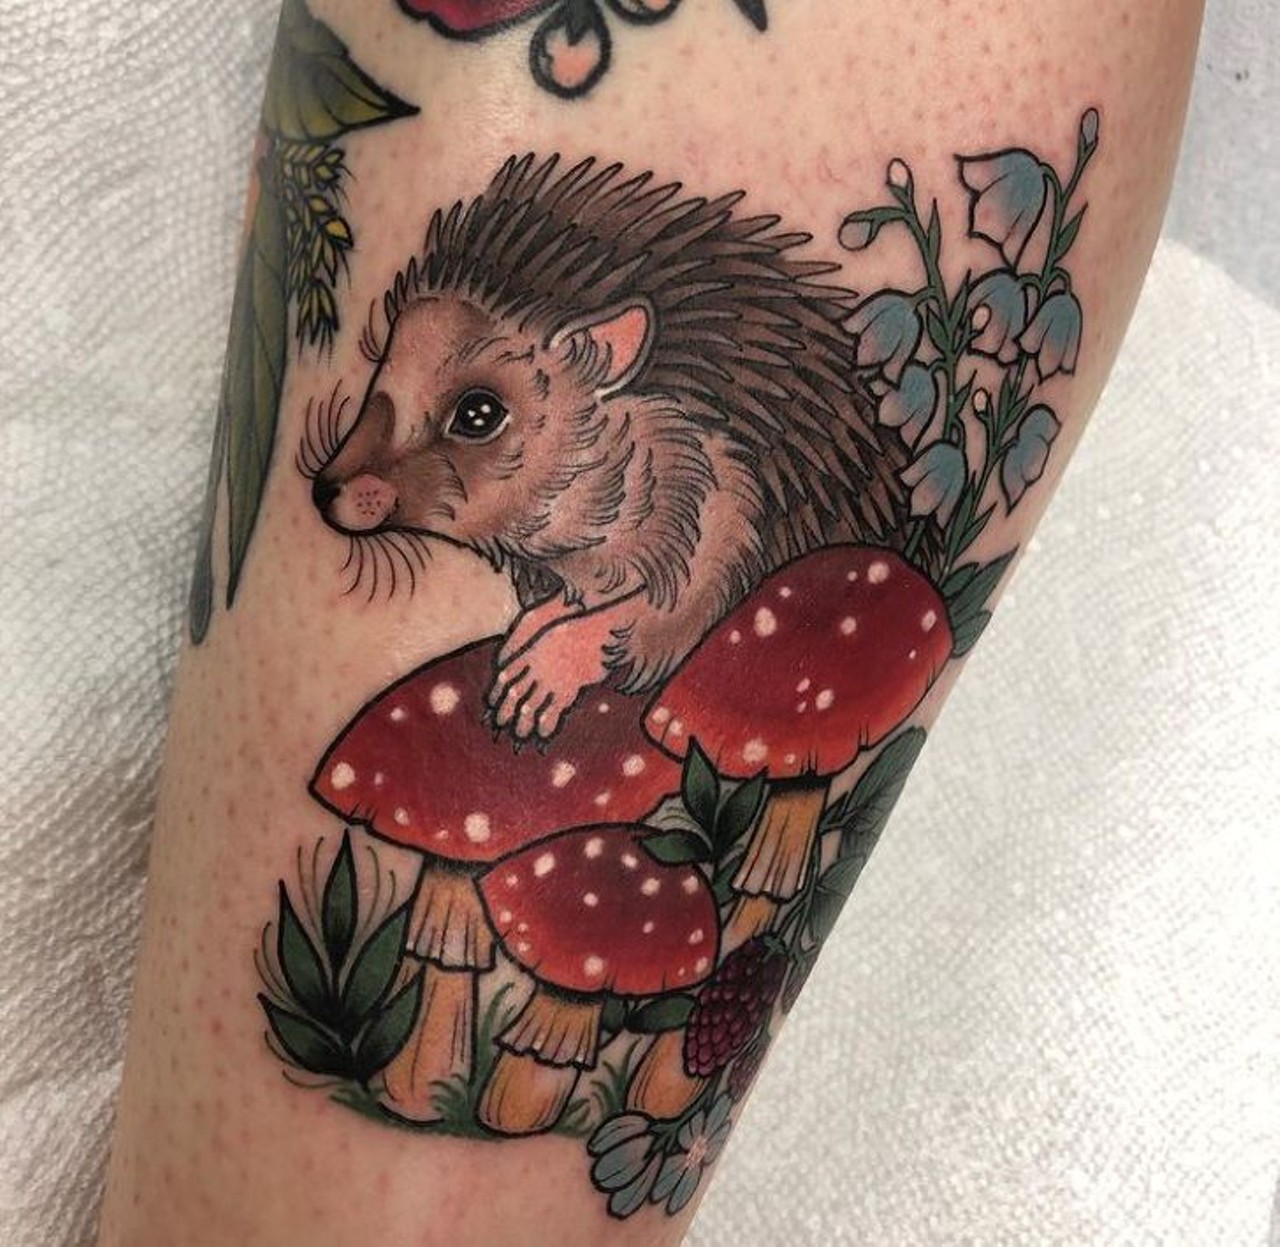 Jessica Hiemstra 
Rise Above Tattoo
1009 N. Mills Ave., 407-730-3142
Jessica Hiemstra&#146;s funky, fun and illustrative tattoos are perfect for animal or punk-alien portraits. You can find her work at Rise Above Tattoo. 
Photo via hammyhram/Instagram